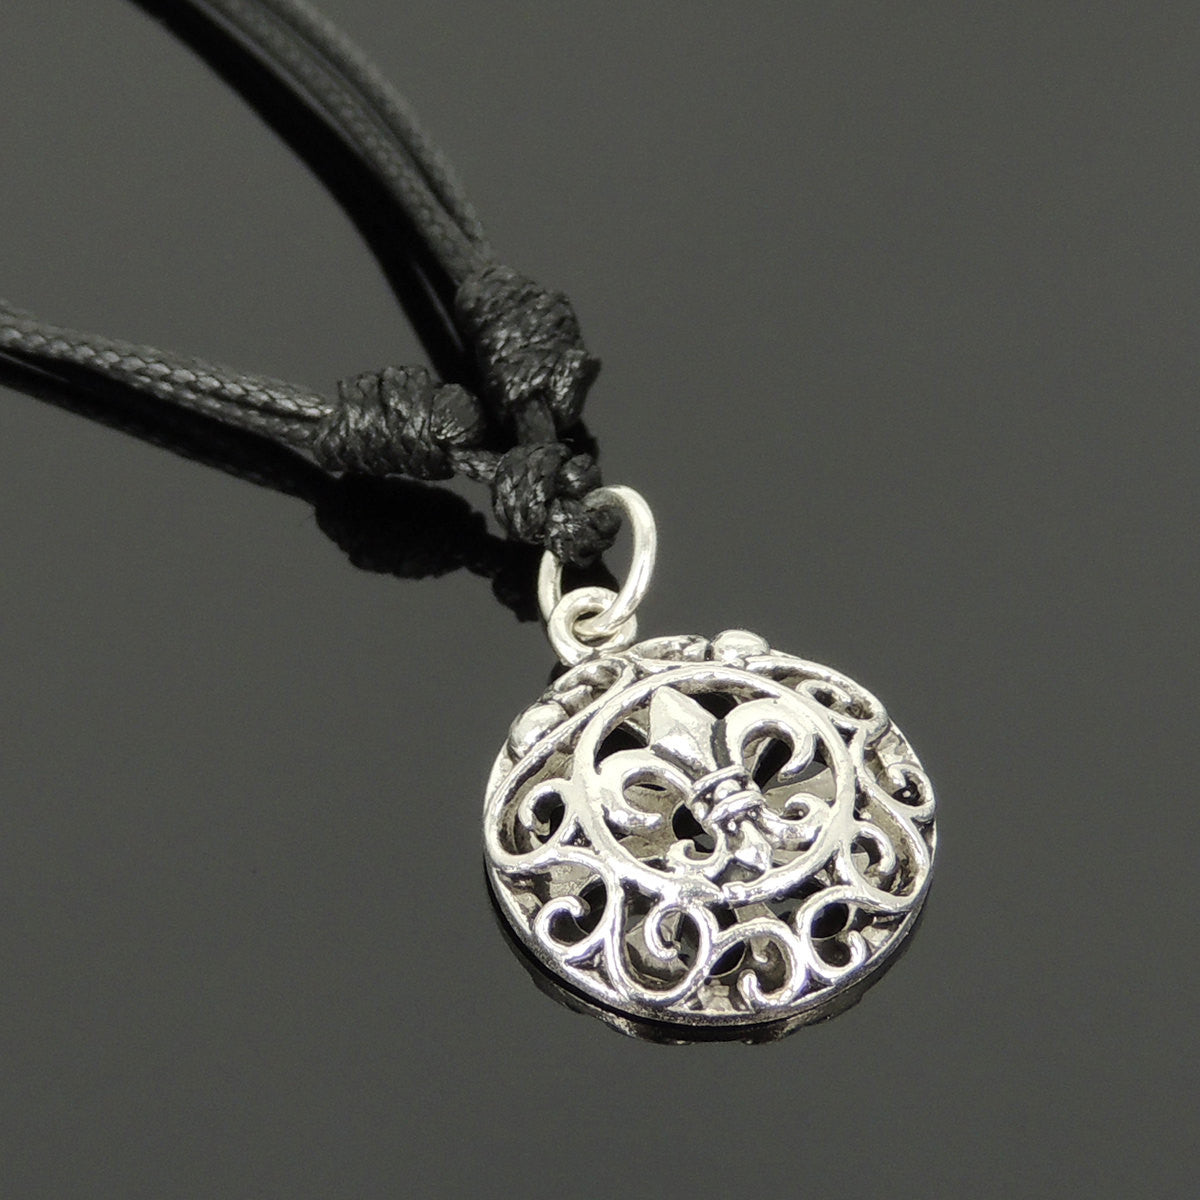 Adjustable Wax Rope Necklace with S925 Sterling Silver Fleur de Lis Sand Dollar Pendant - Handmade by Gem & Silver NK145